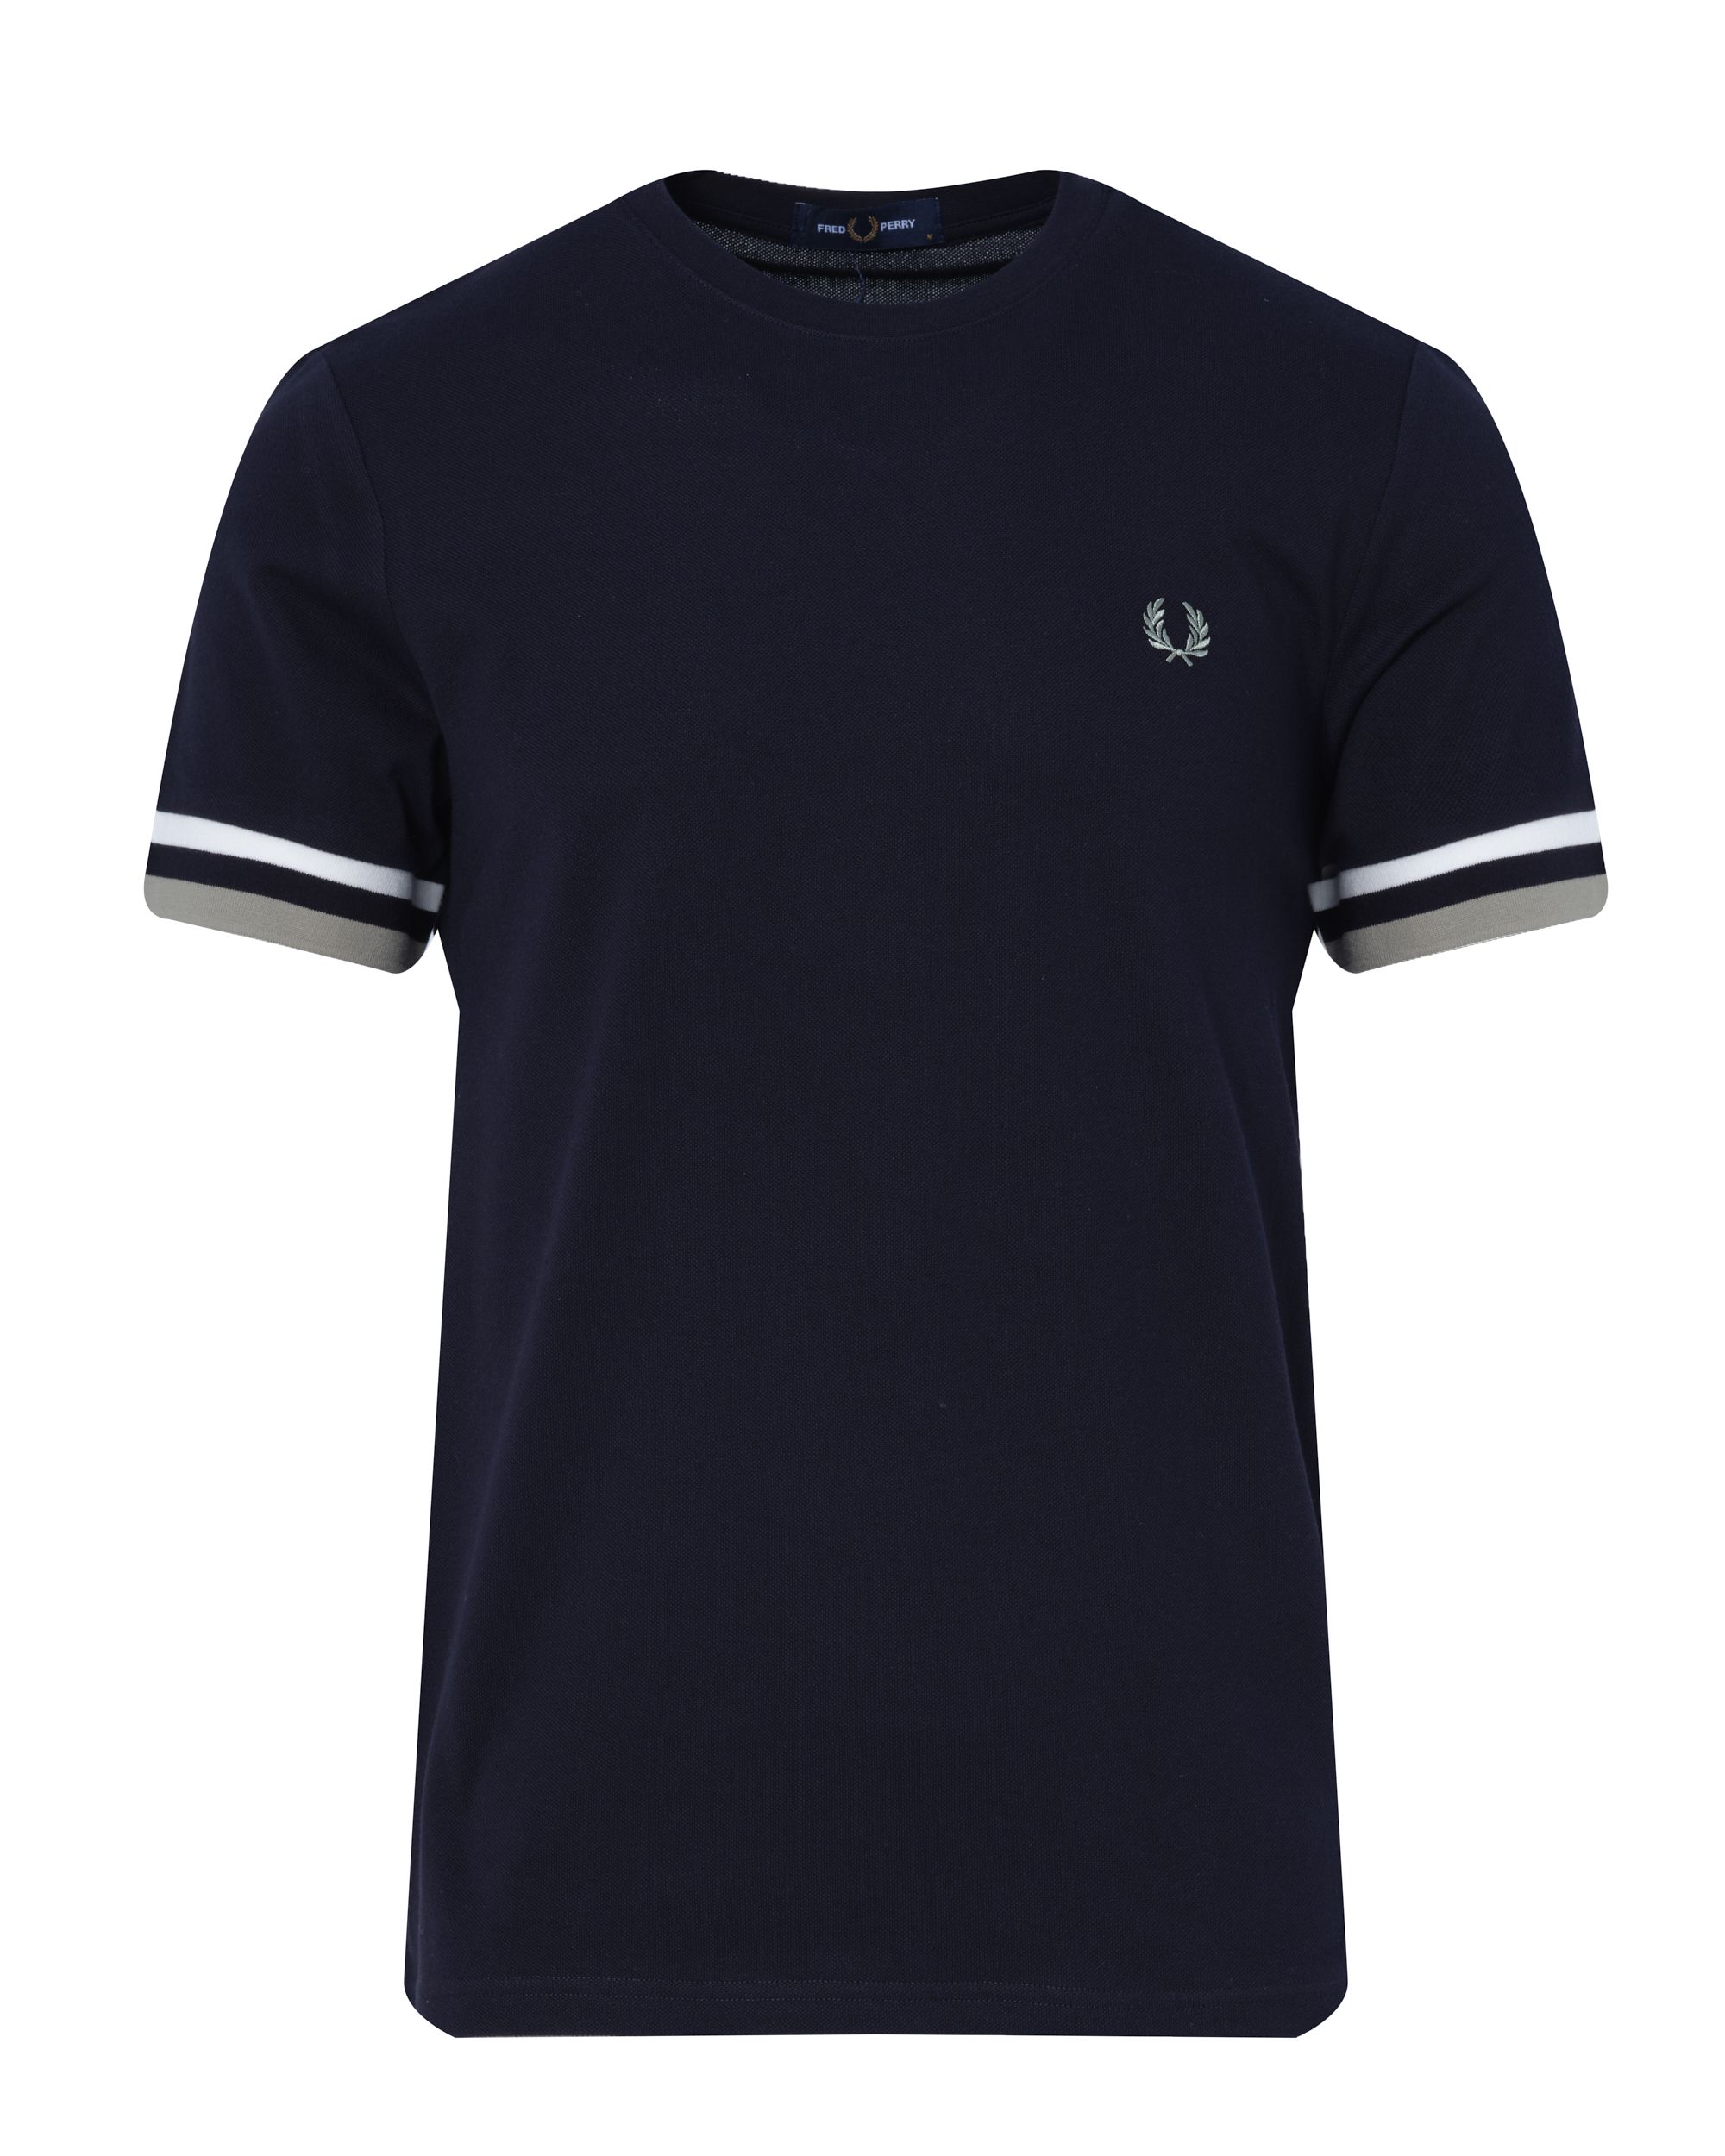 Fred Perry Polo KM Donker blauw 083531-001-L